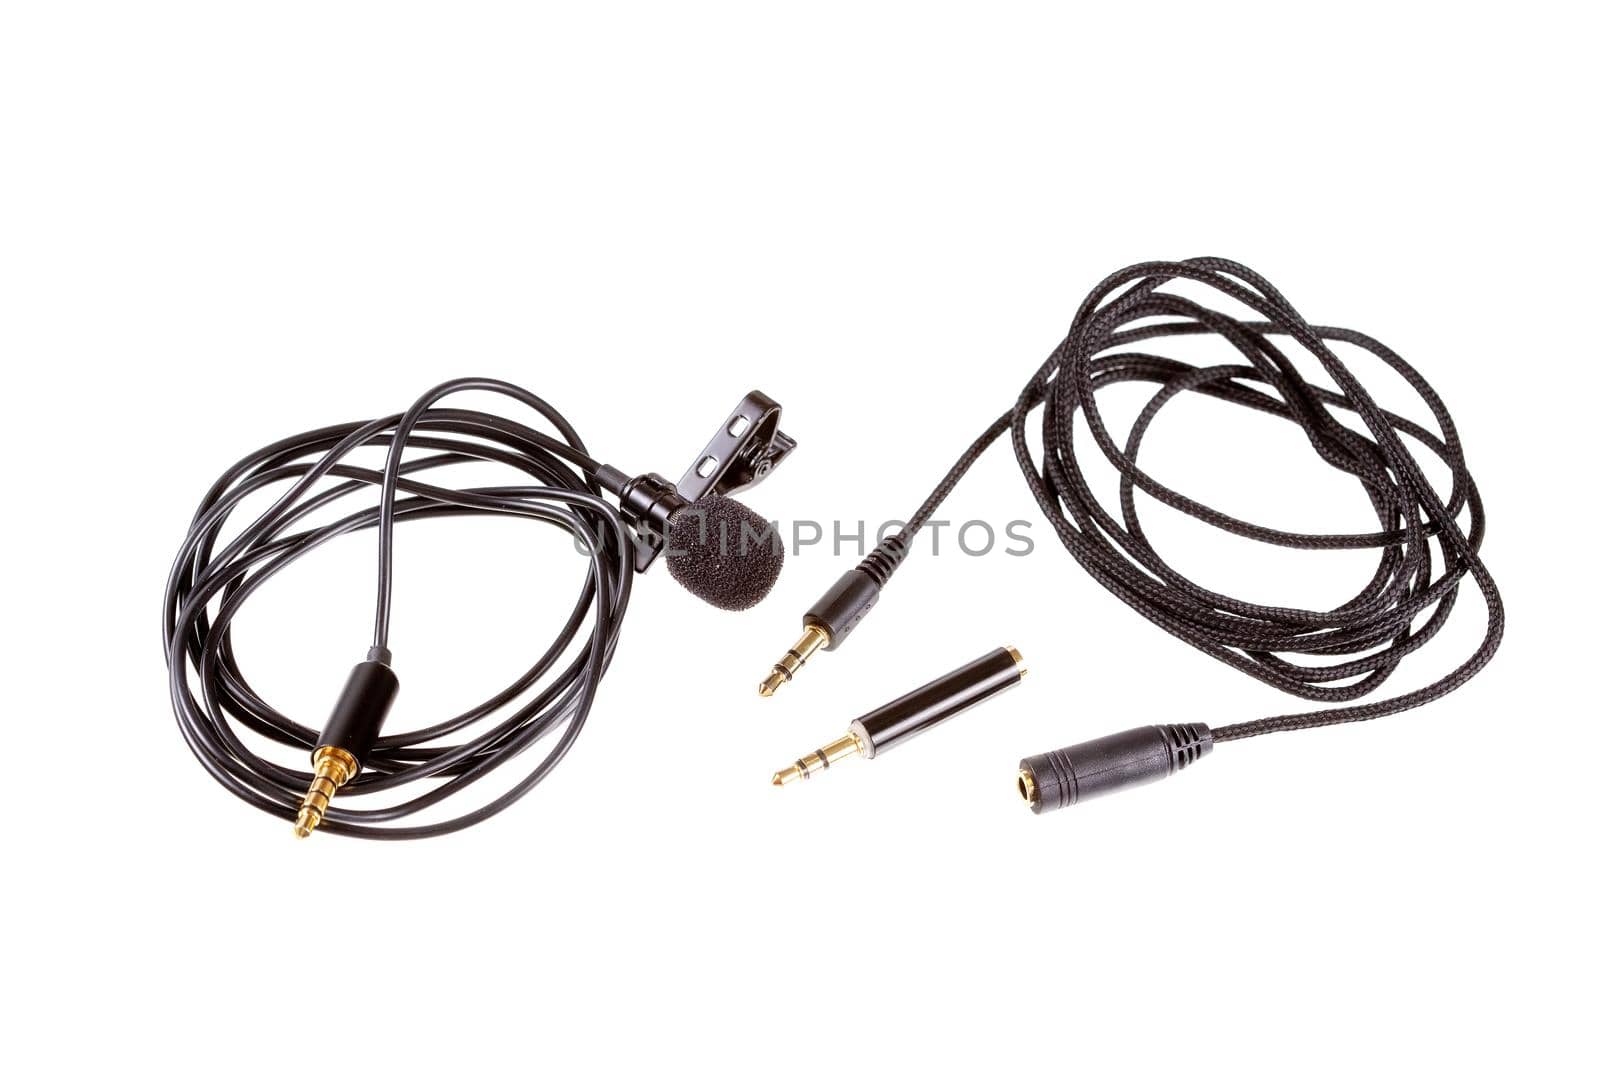 Small lavalier microphone or lapel mic with clip, adapter and extension cable by galinasharapova